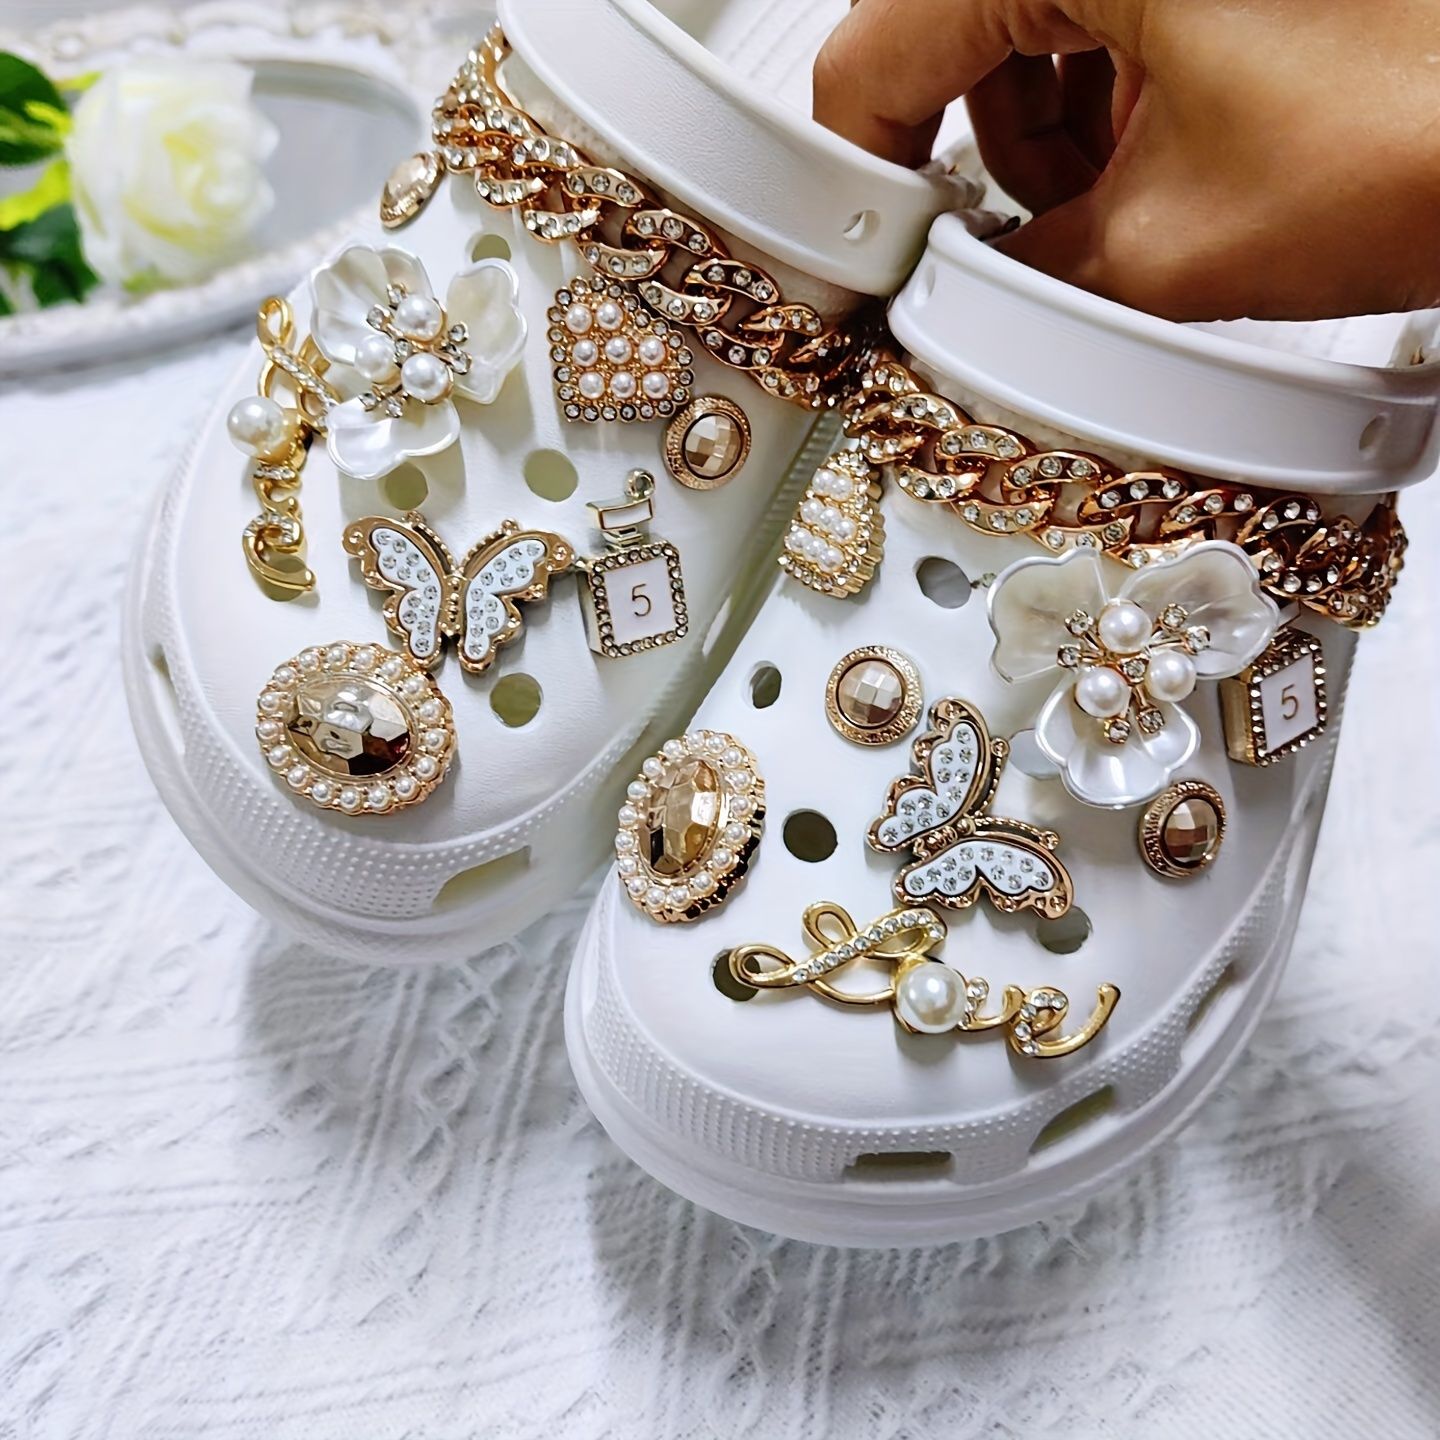 Wholesale Fashion Women Men Shoe Charms Diy Bling Crystal Rhinestone Pearl  Clog Jewelry Set Decoration Croc Charms For Croc From m.